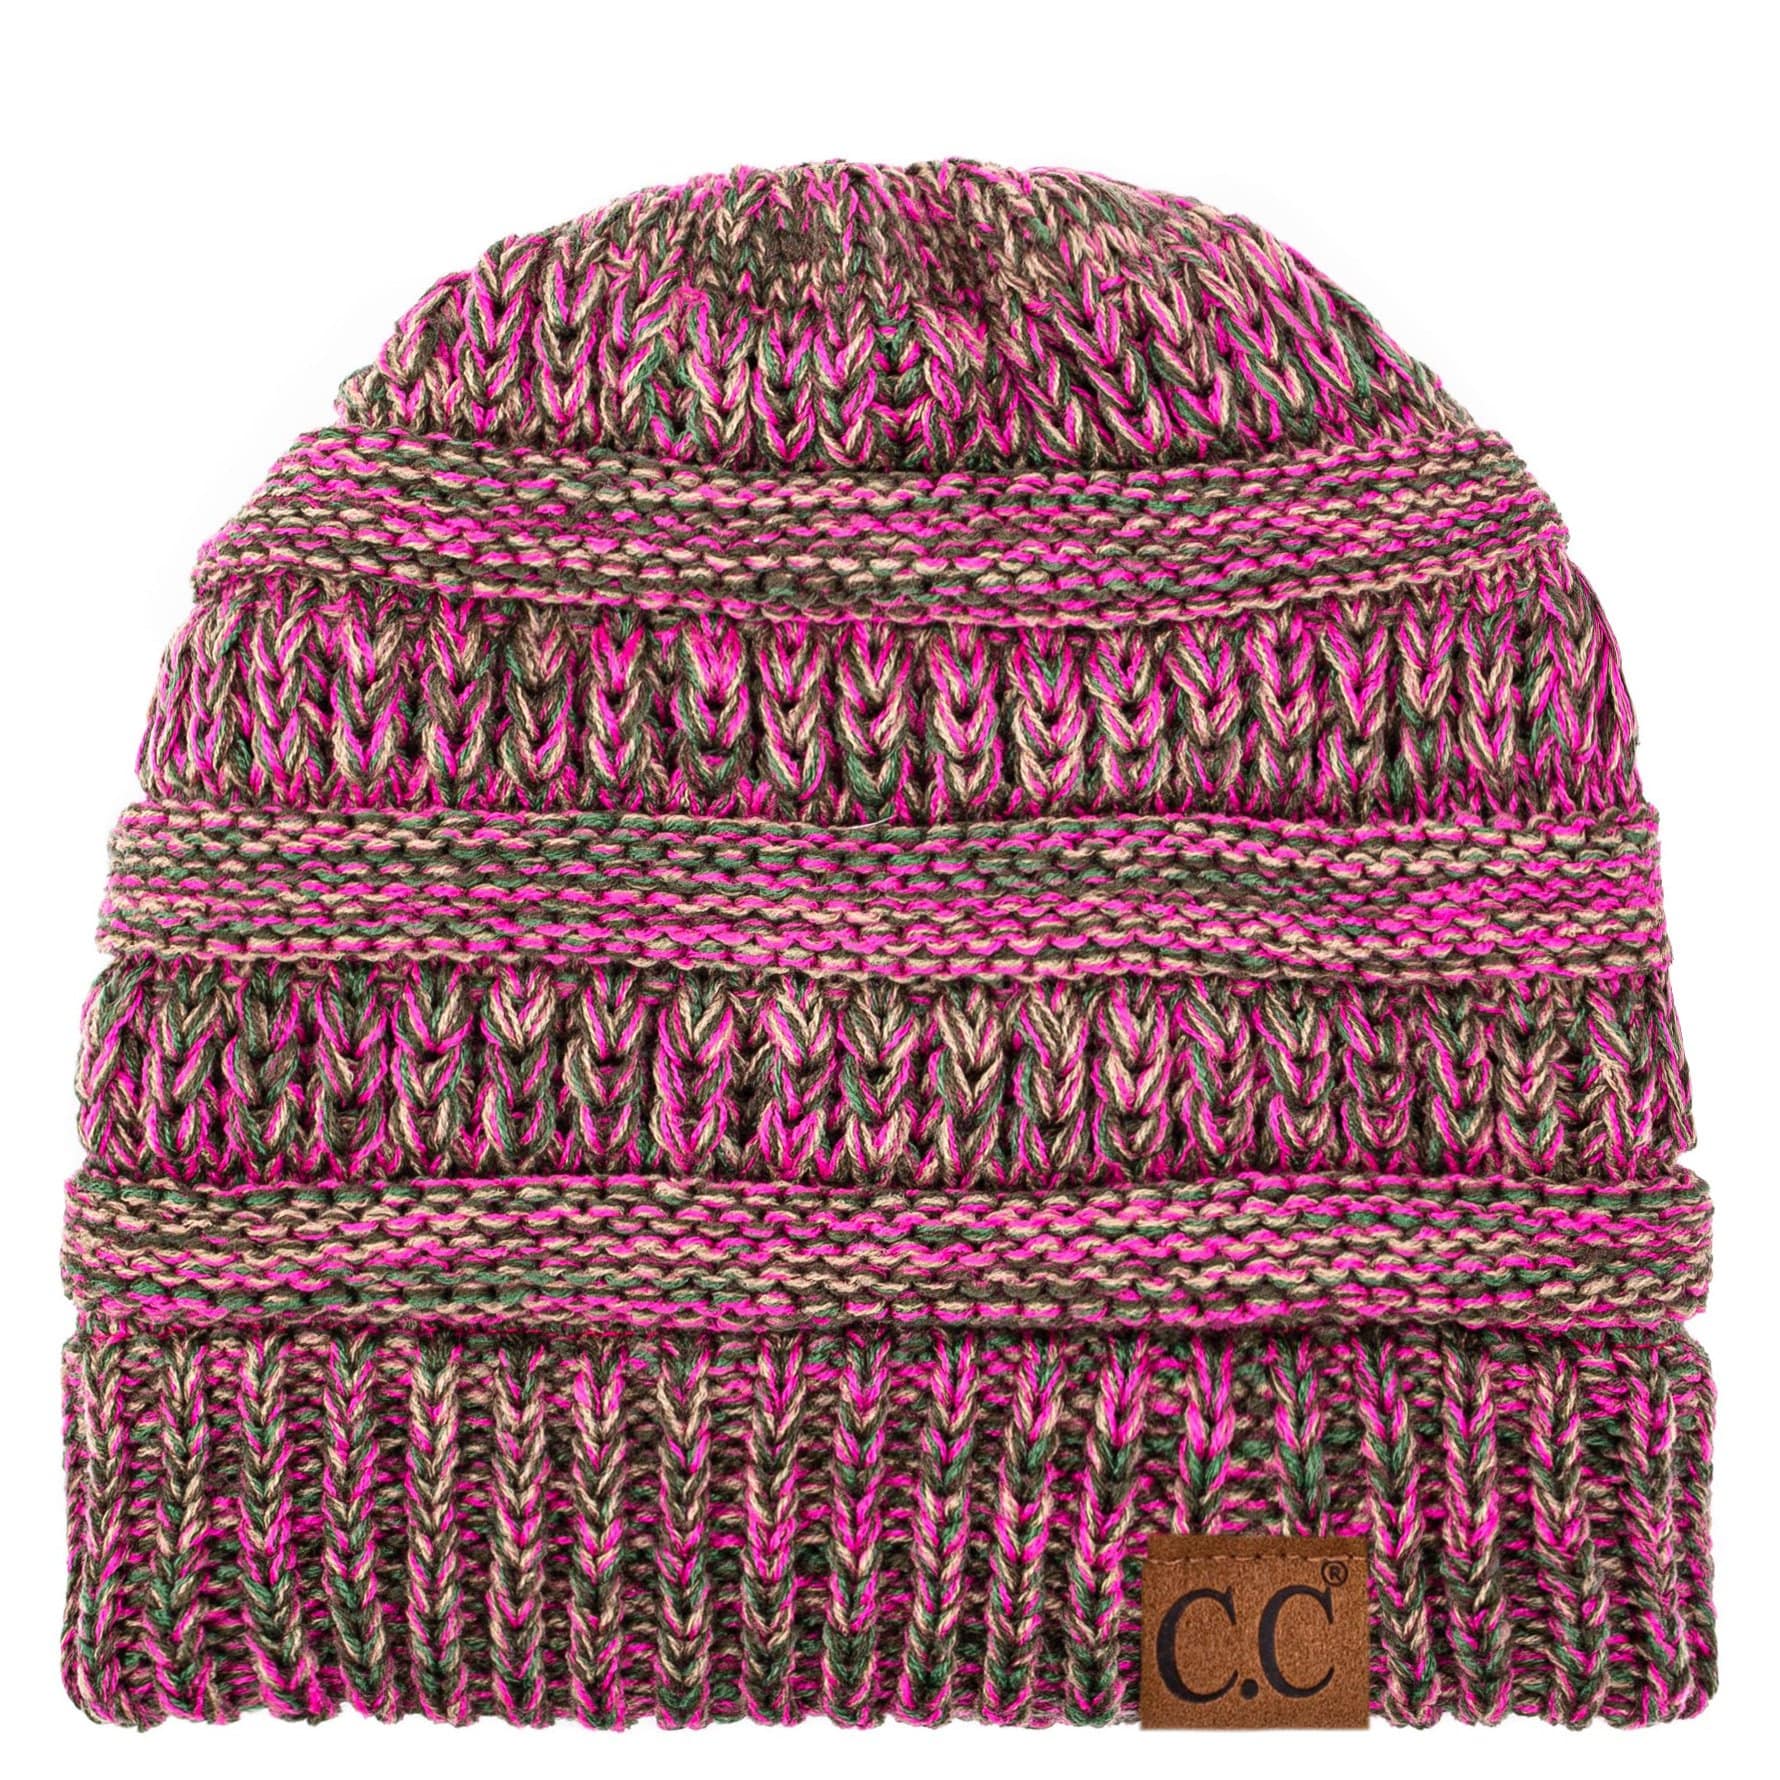 C.C Apparel Hot Pink/Olive/Camel C.C Trendy Warm Chunky Soft Stretch Three-Toned Cable Knit Beanie Skully